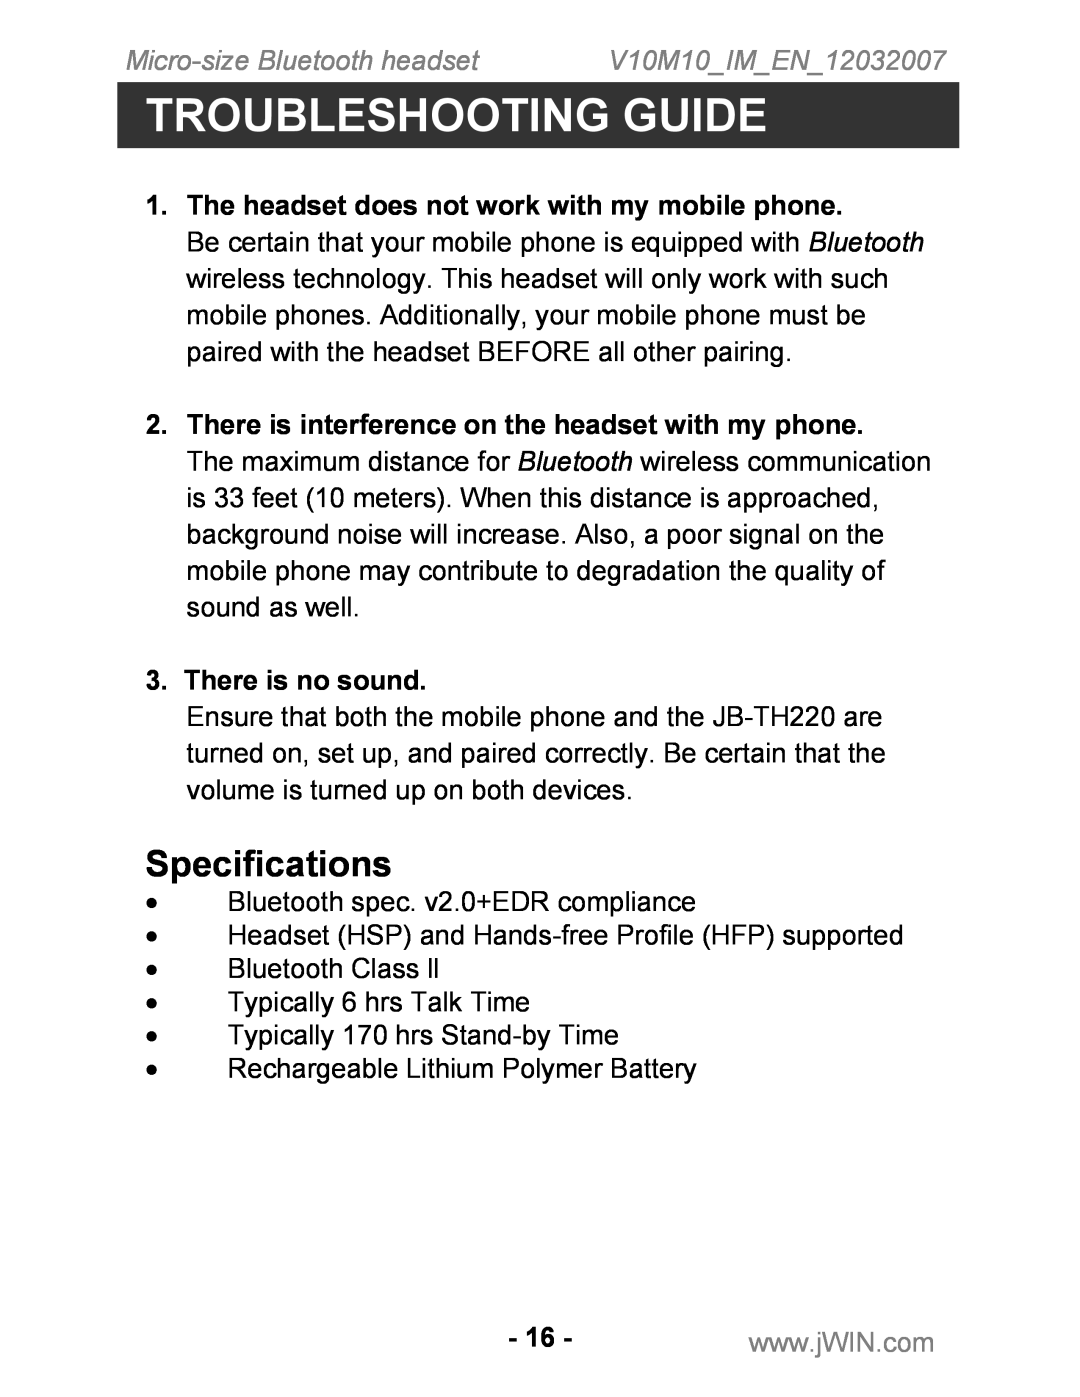 Jwin JB-TH210 instruction manual Troubleshooting Guide, Specifications, Micro-sizeBluetooth headset, There is no sound 